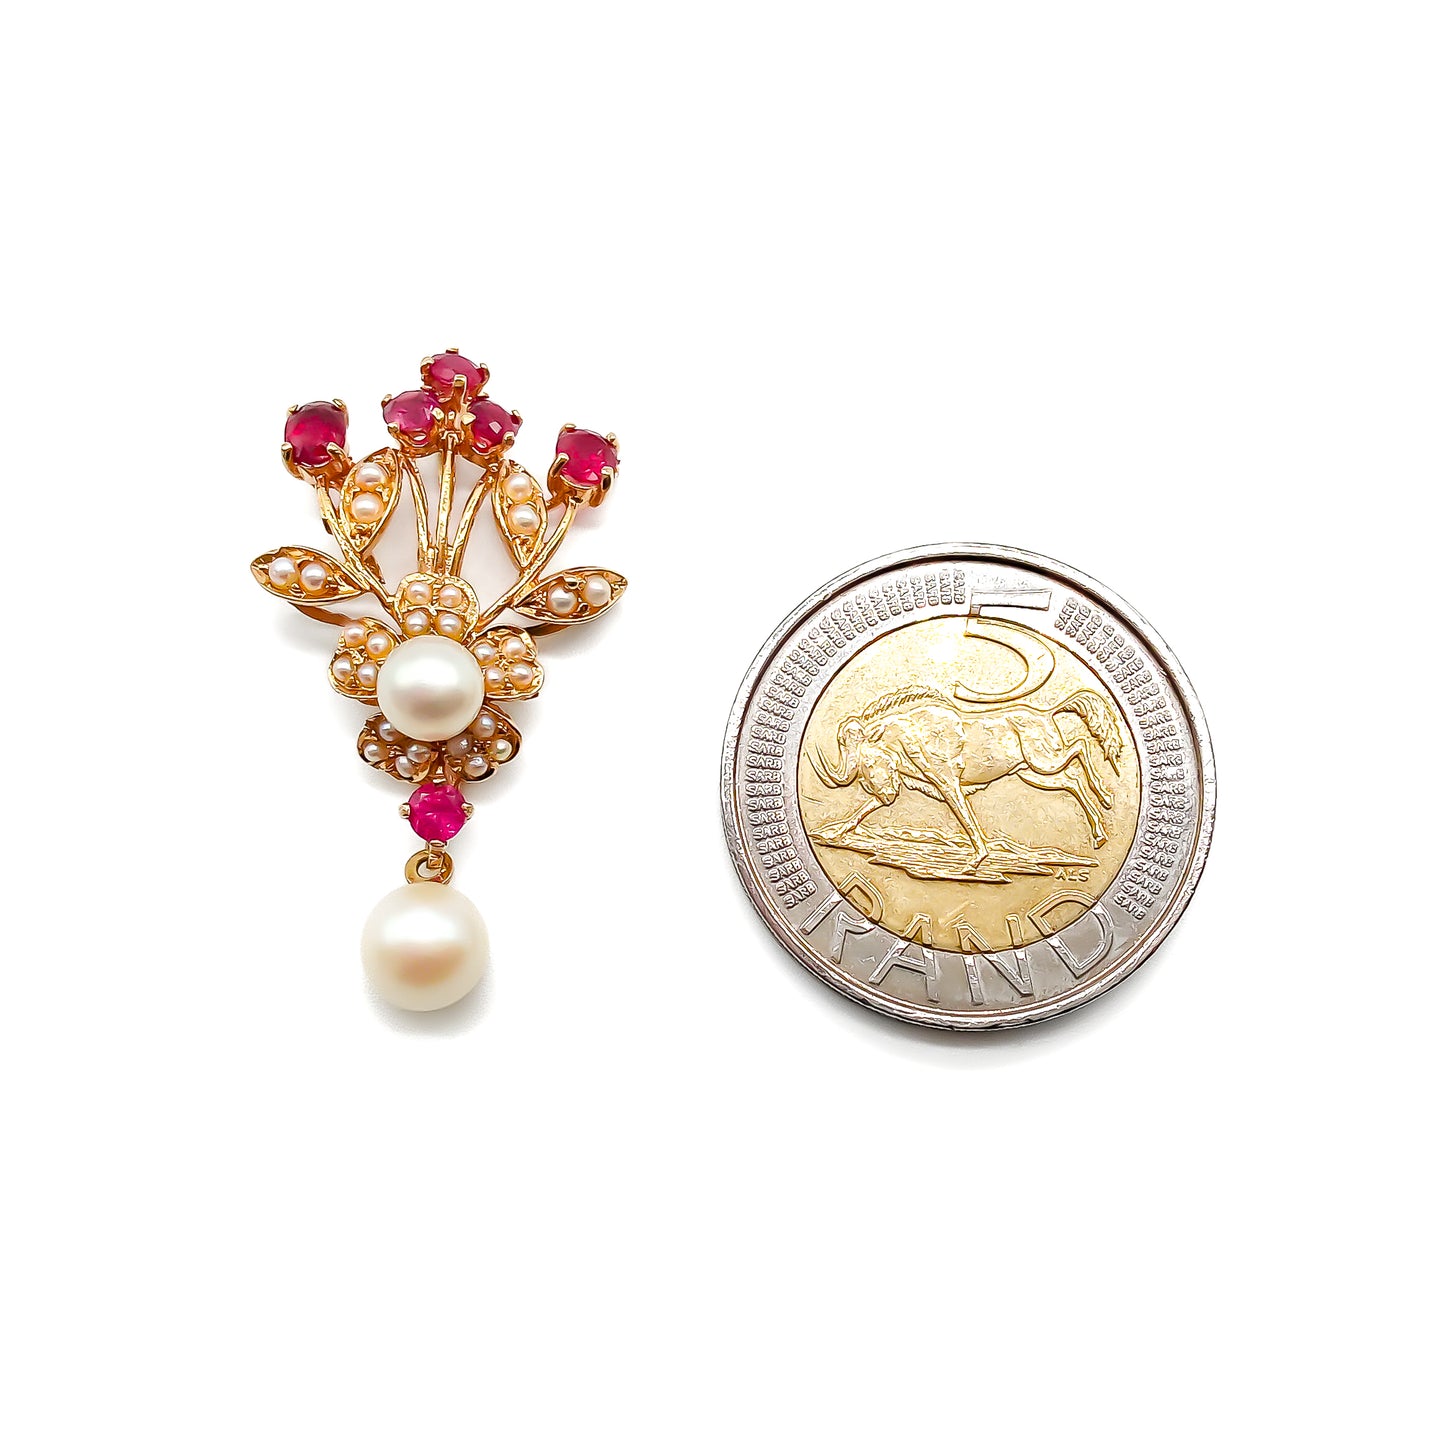 Pretty 14ct Gold pendant set with six faceted rubies, a centre pearl surrounded by seed pearls in a flower design, and a dangling pearl drop.